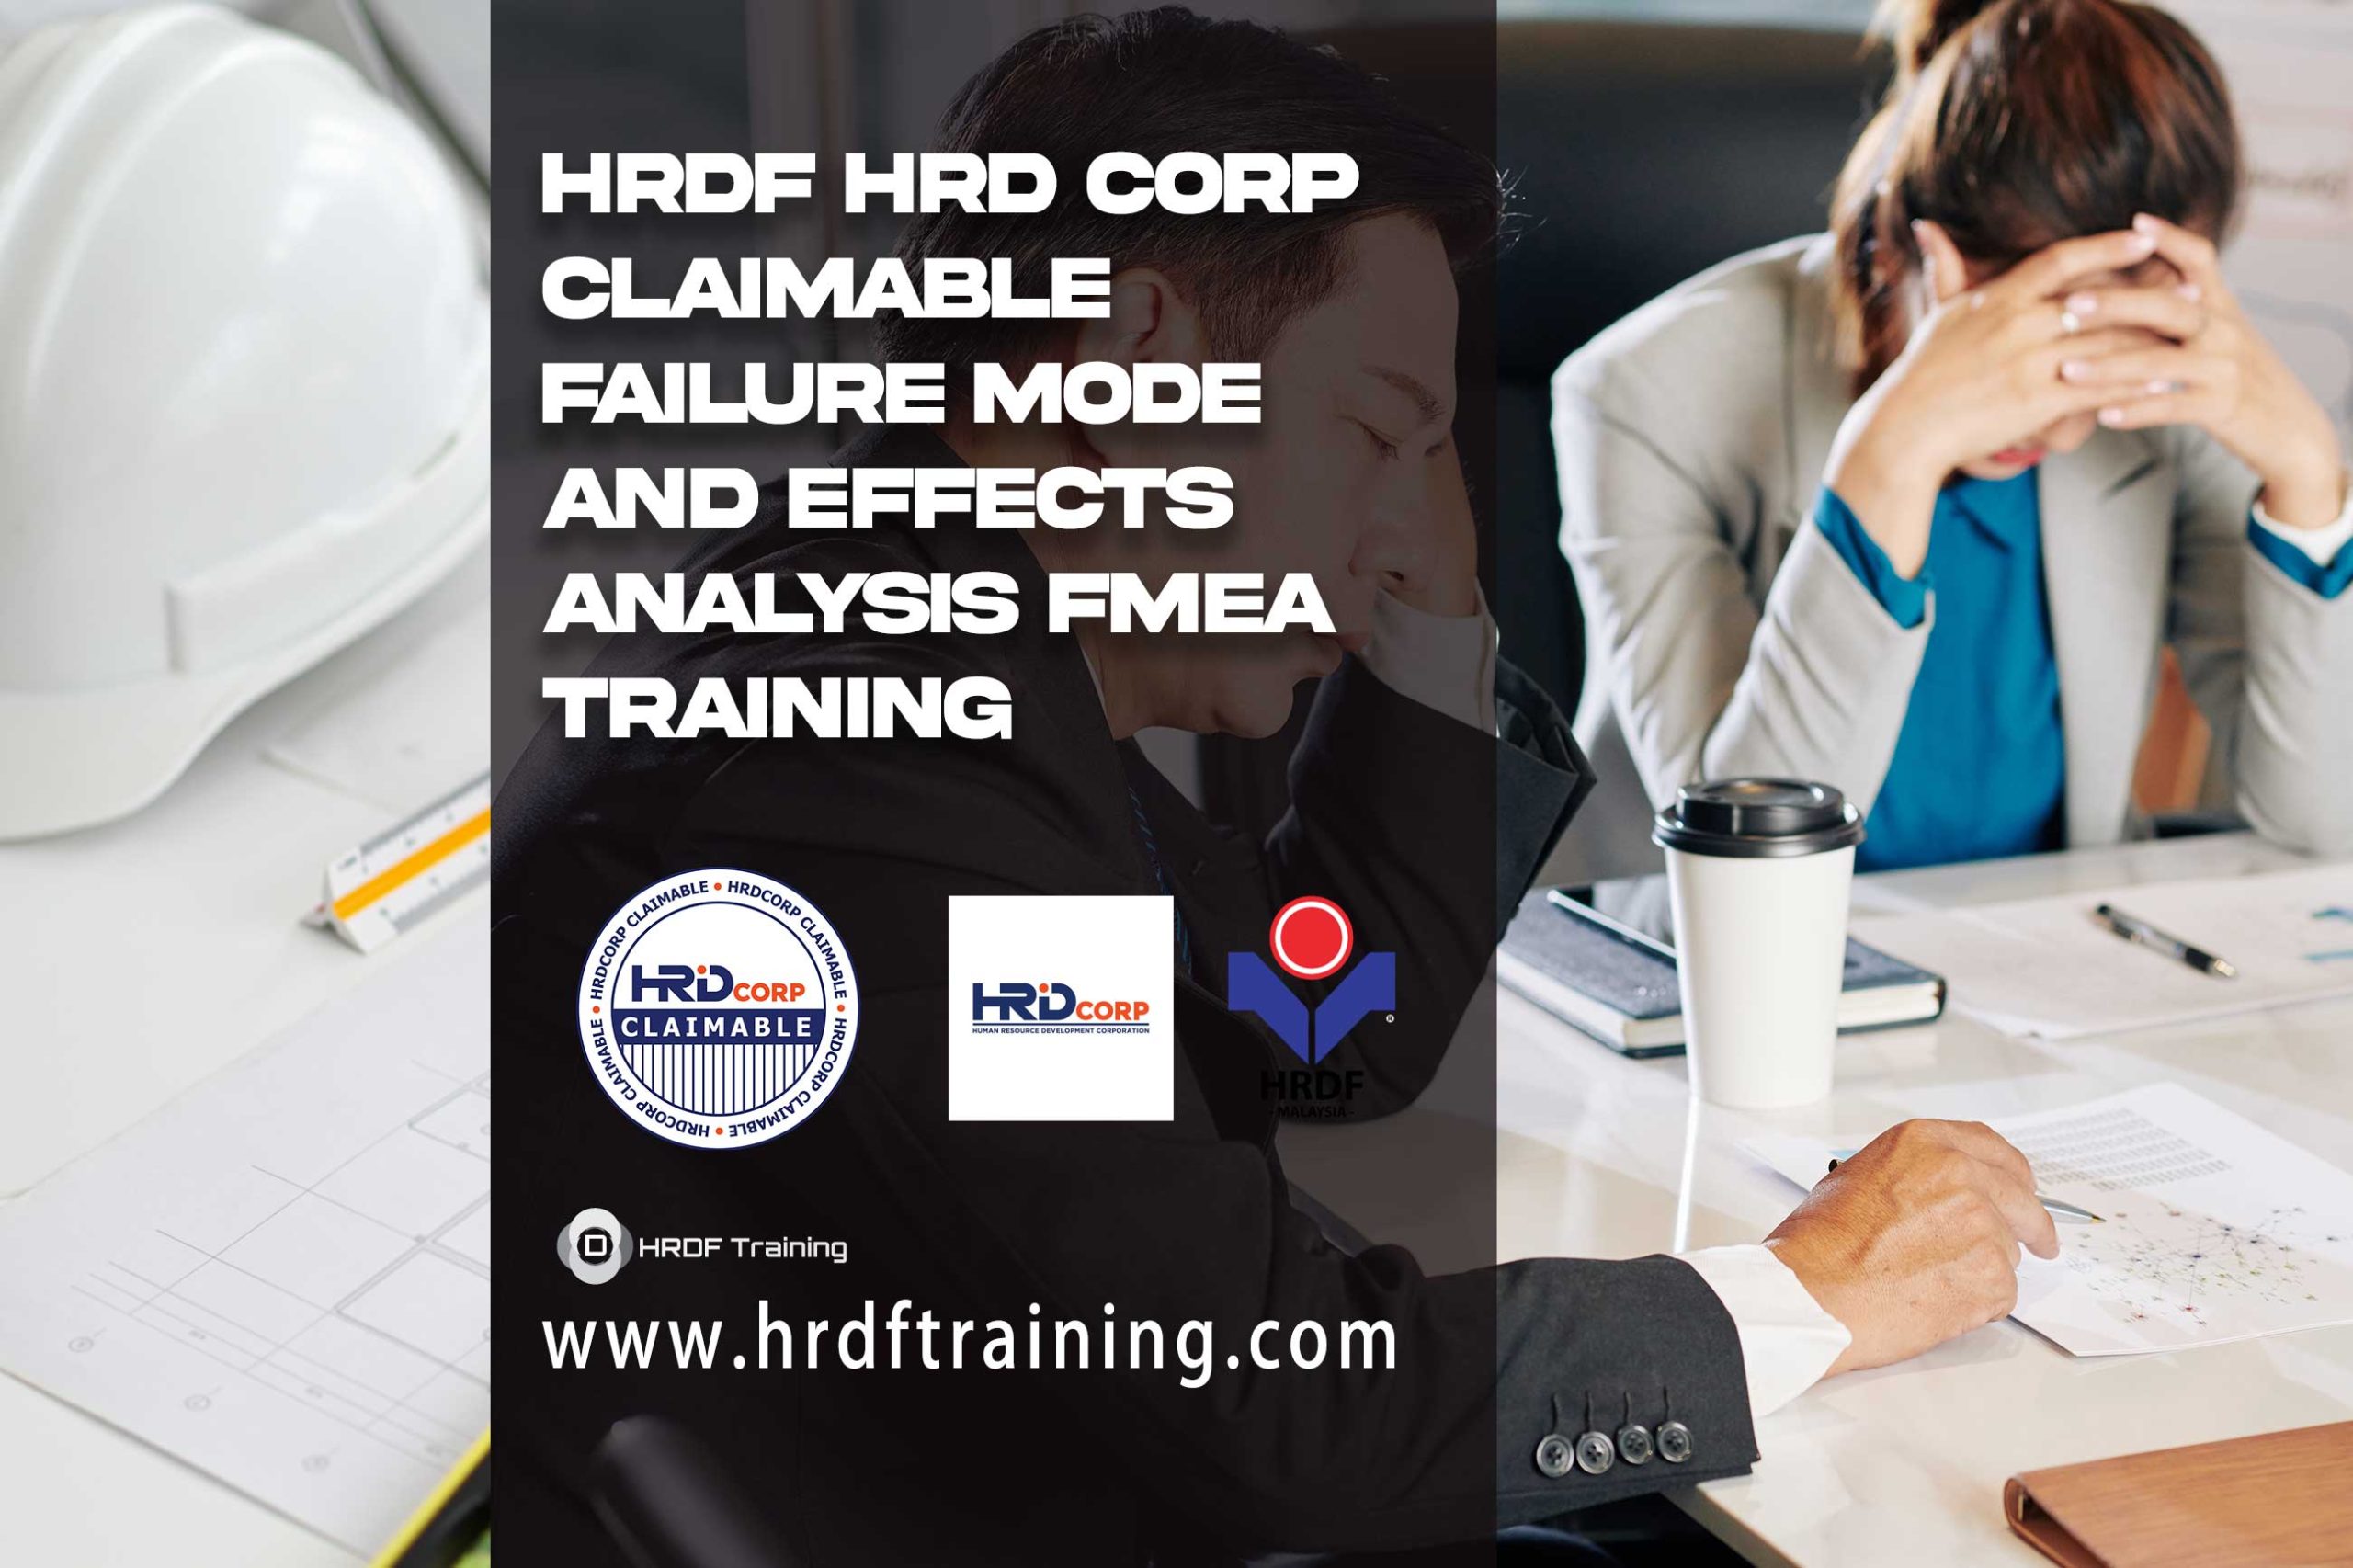 HRDF-HRD-Corp-Claimable-Failure-Mode-and-Effects-Analysis-FMEA-Training